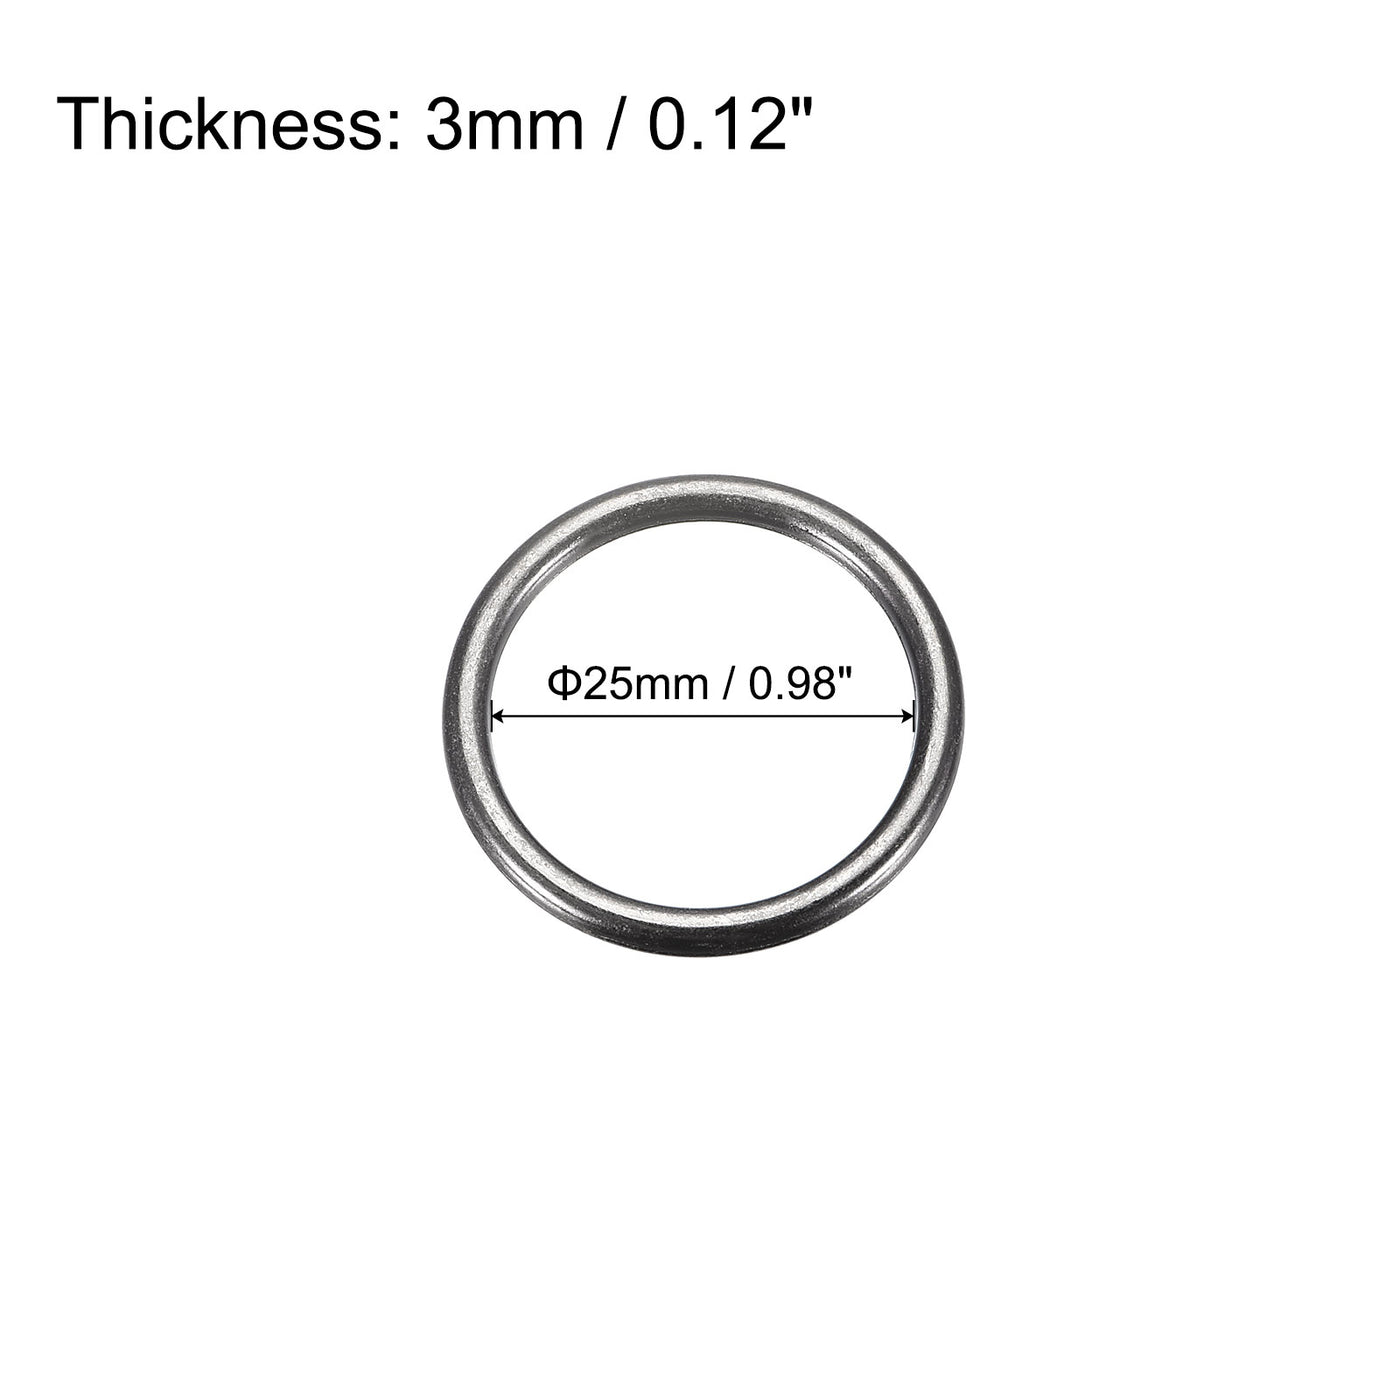 uxcell Uxcell Metal O Rings, 15pcs 25mm(0.98") ID 3mm Thick Welded O-Ringe, Dark Gray